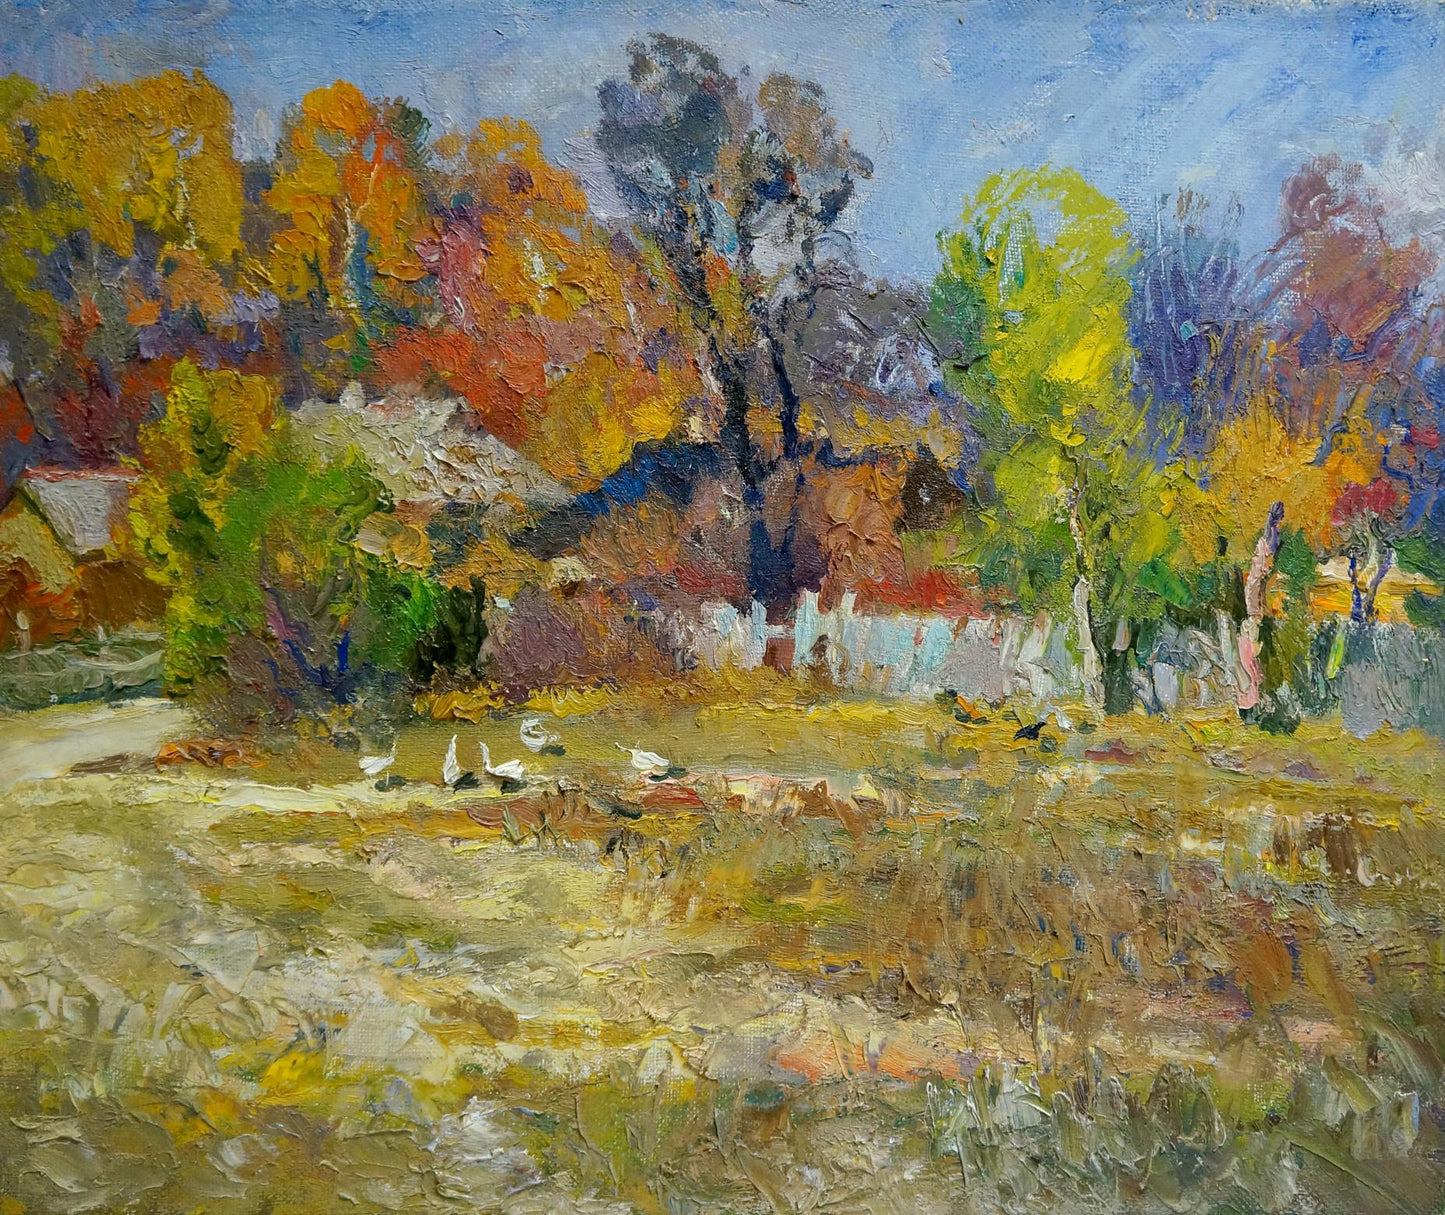 Autumn Landscape: an oil painting by an unknown artist